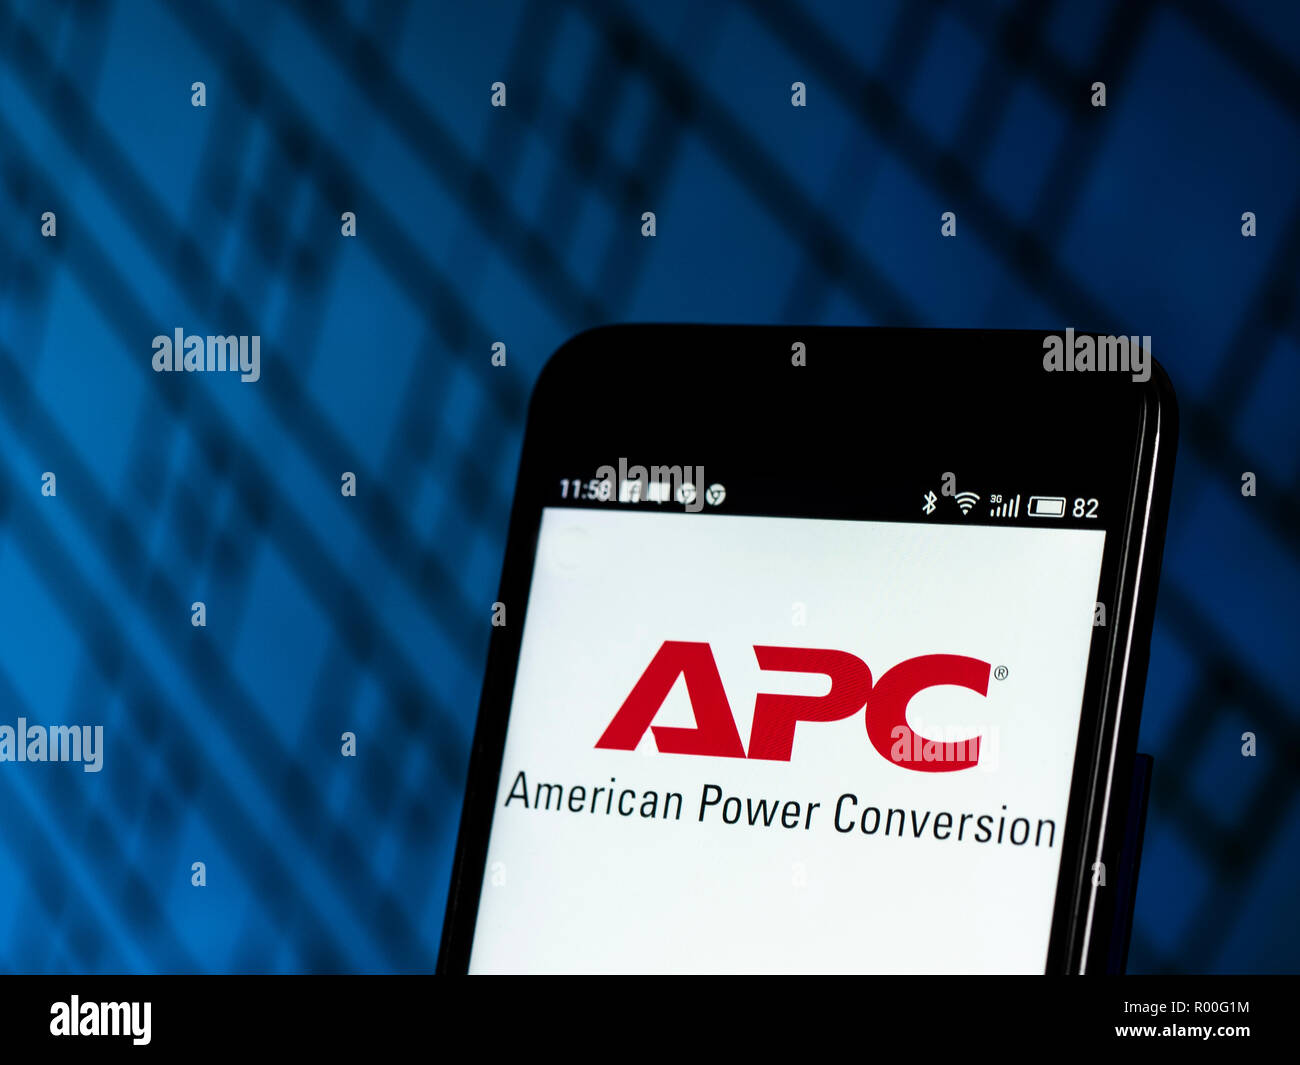 APC by Schneider Electric logo seen displayed on smart phone. APC by  Schneider Electric, formerly known as American Power Conversion Corporation,  is a manufacturer of uninterruptible power supplies, electronics  peripherals and data